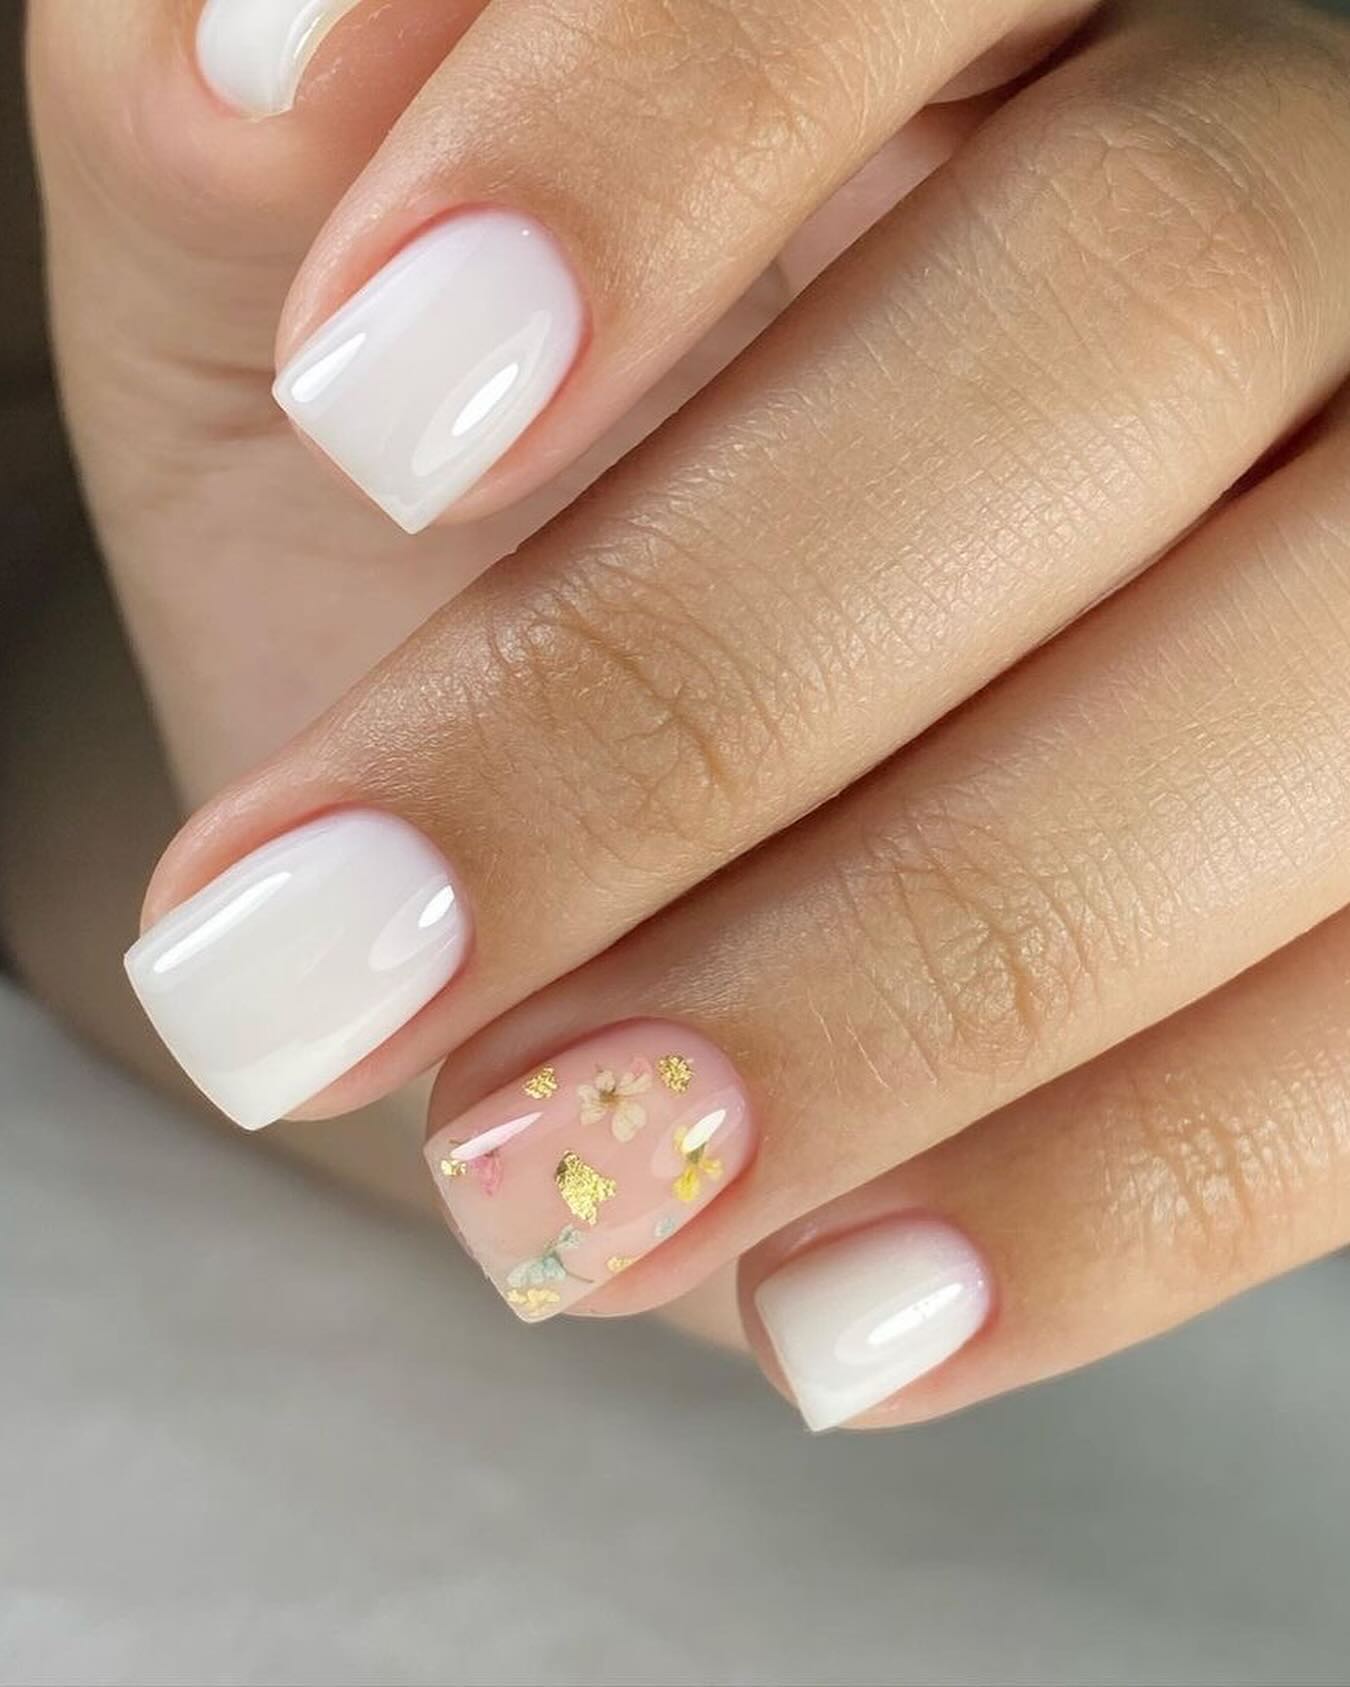 100 Of The Best Spring Inspired Nail Designs images 73